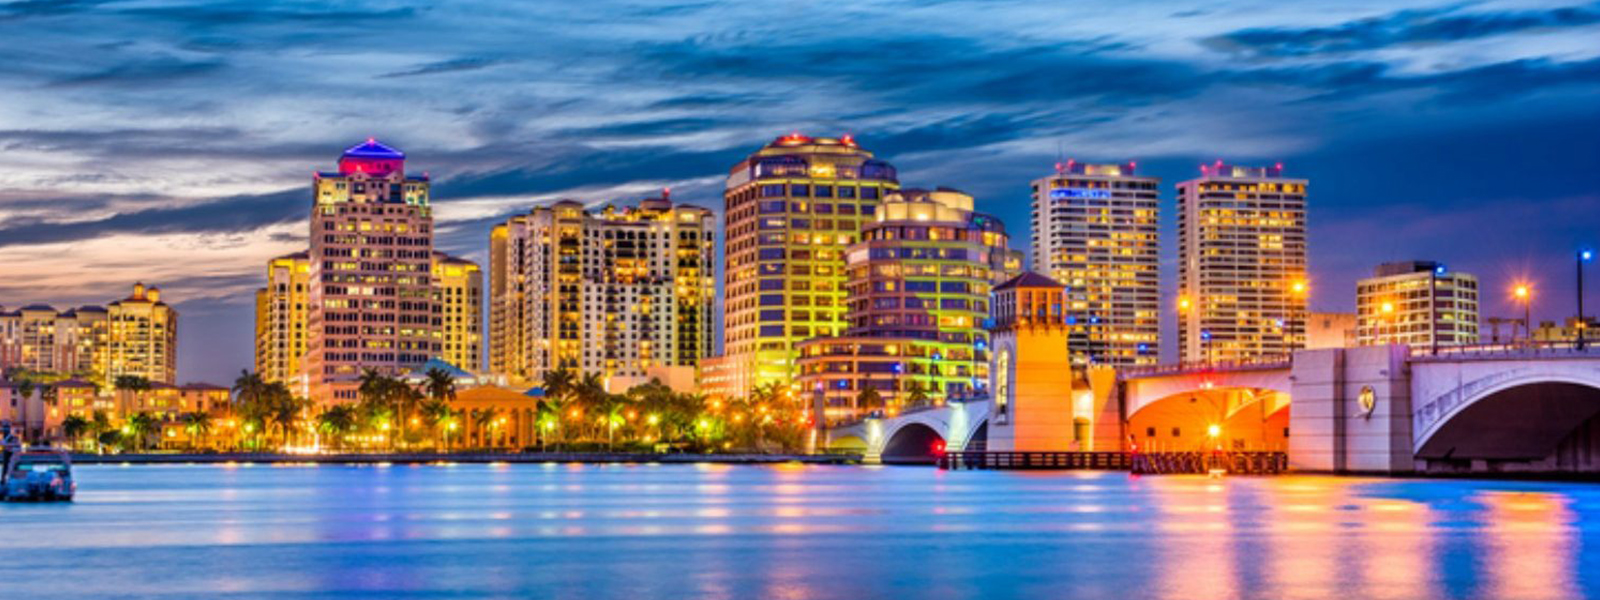 reservation flight Chattanooga to West Palm Beach by phone